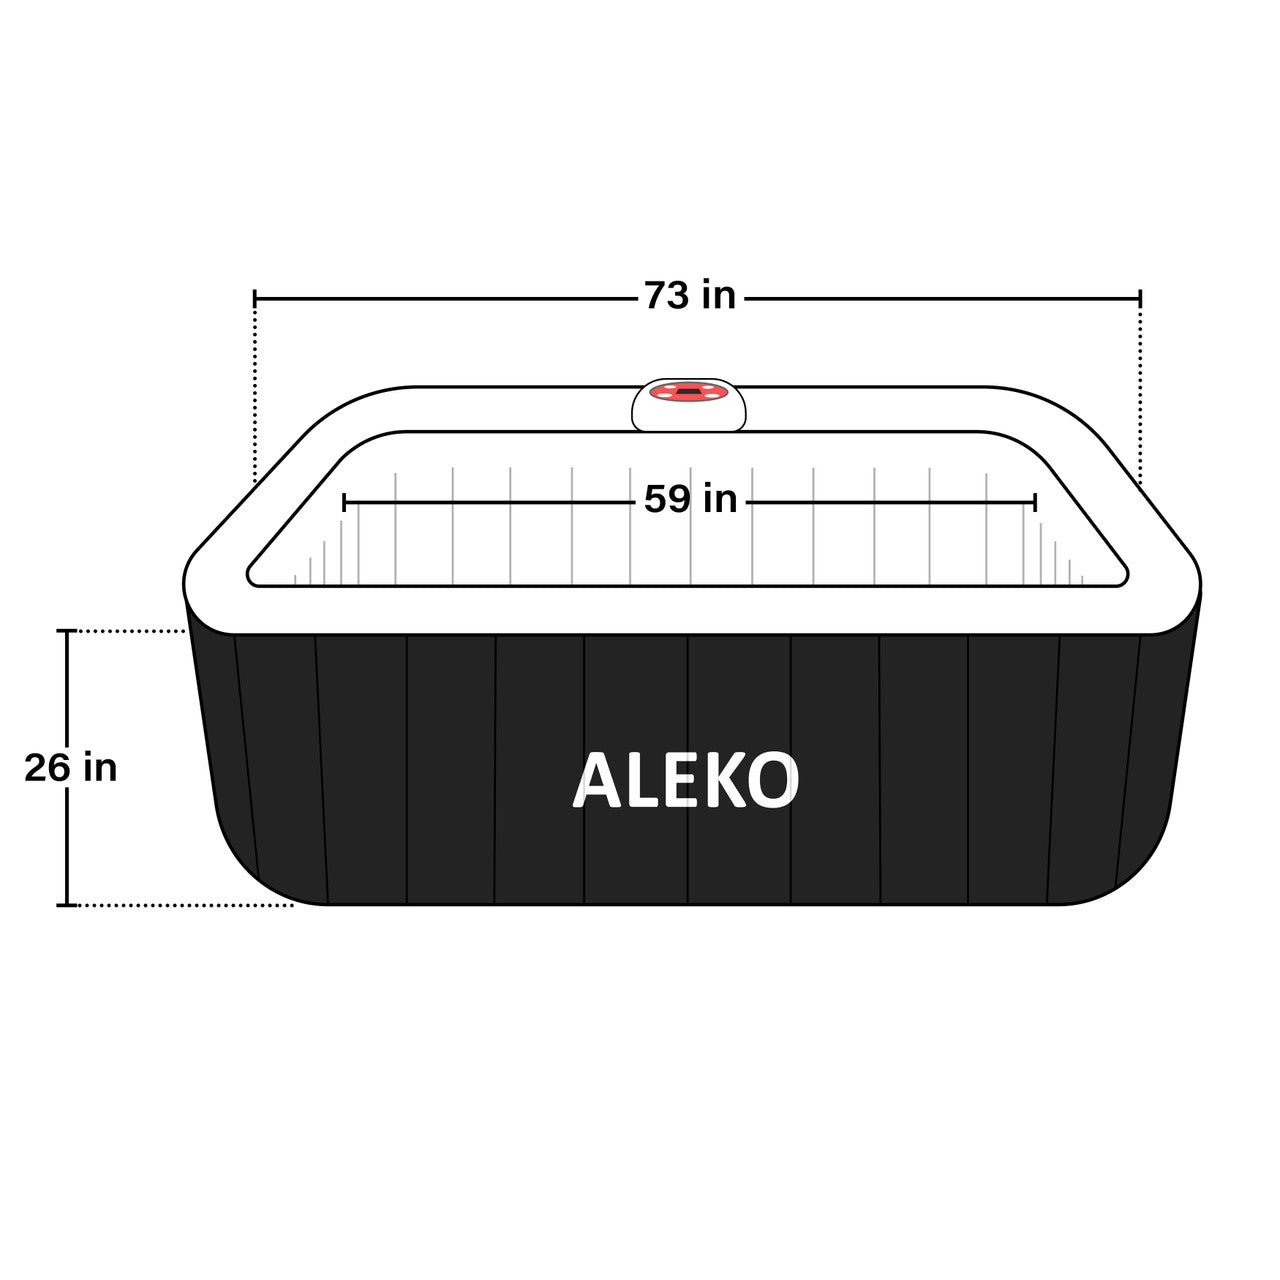 Aleko Square Inflatable Jetted Hot Tub with Cover - 6 Person - 265 Gallon - Black HTISQ6GYBK-AP - Serenity Provision